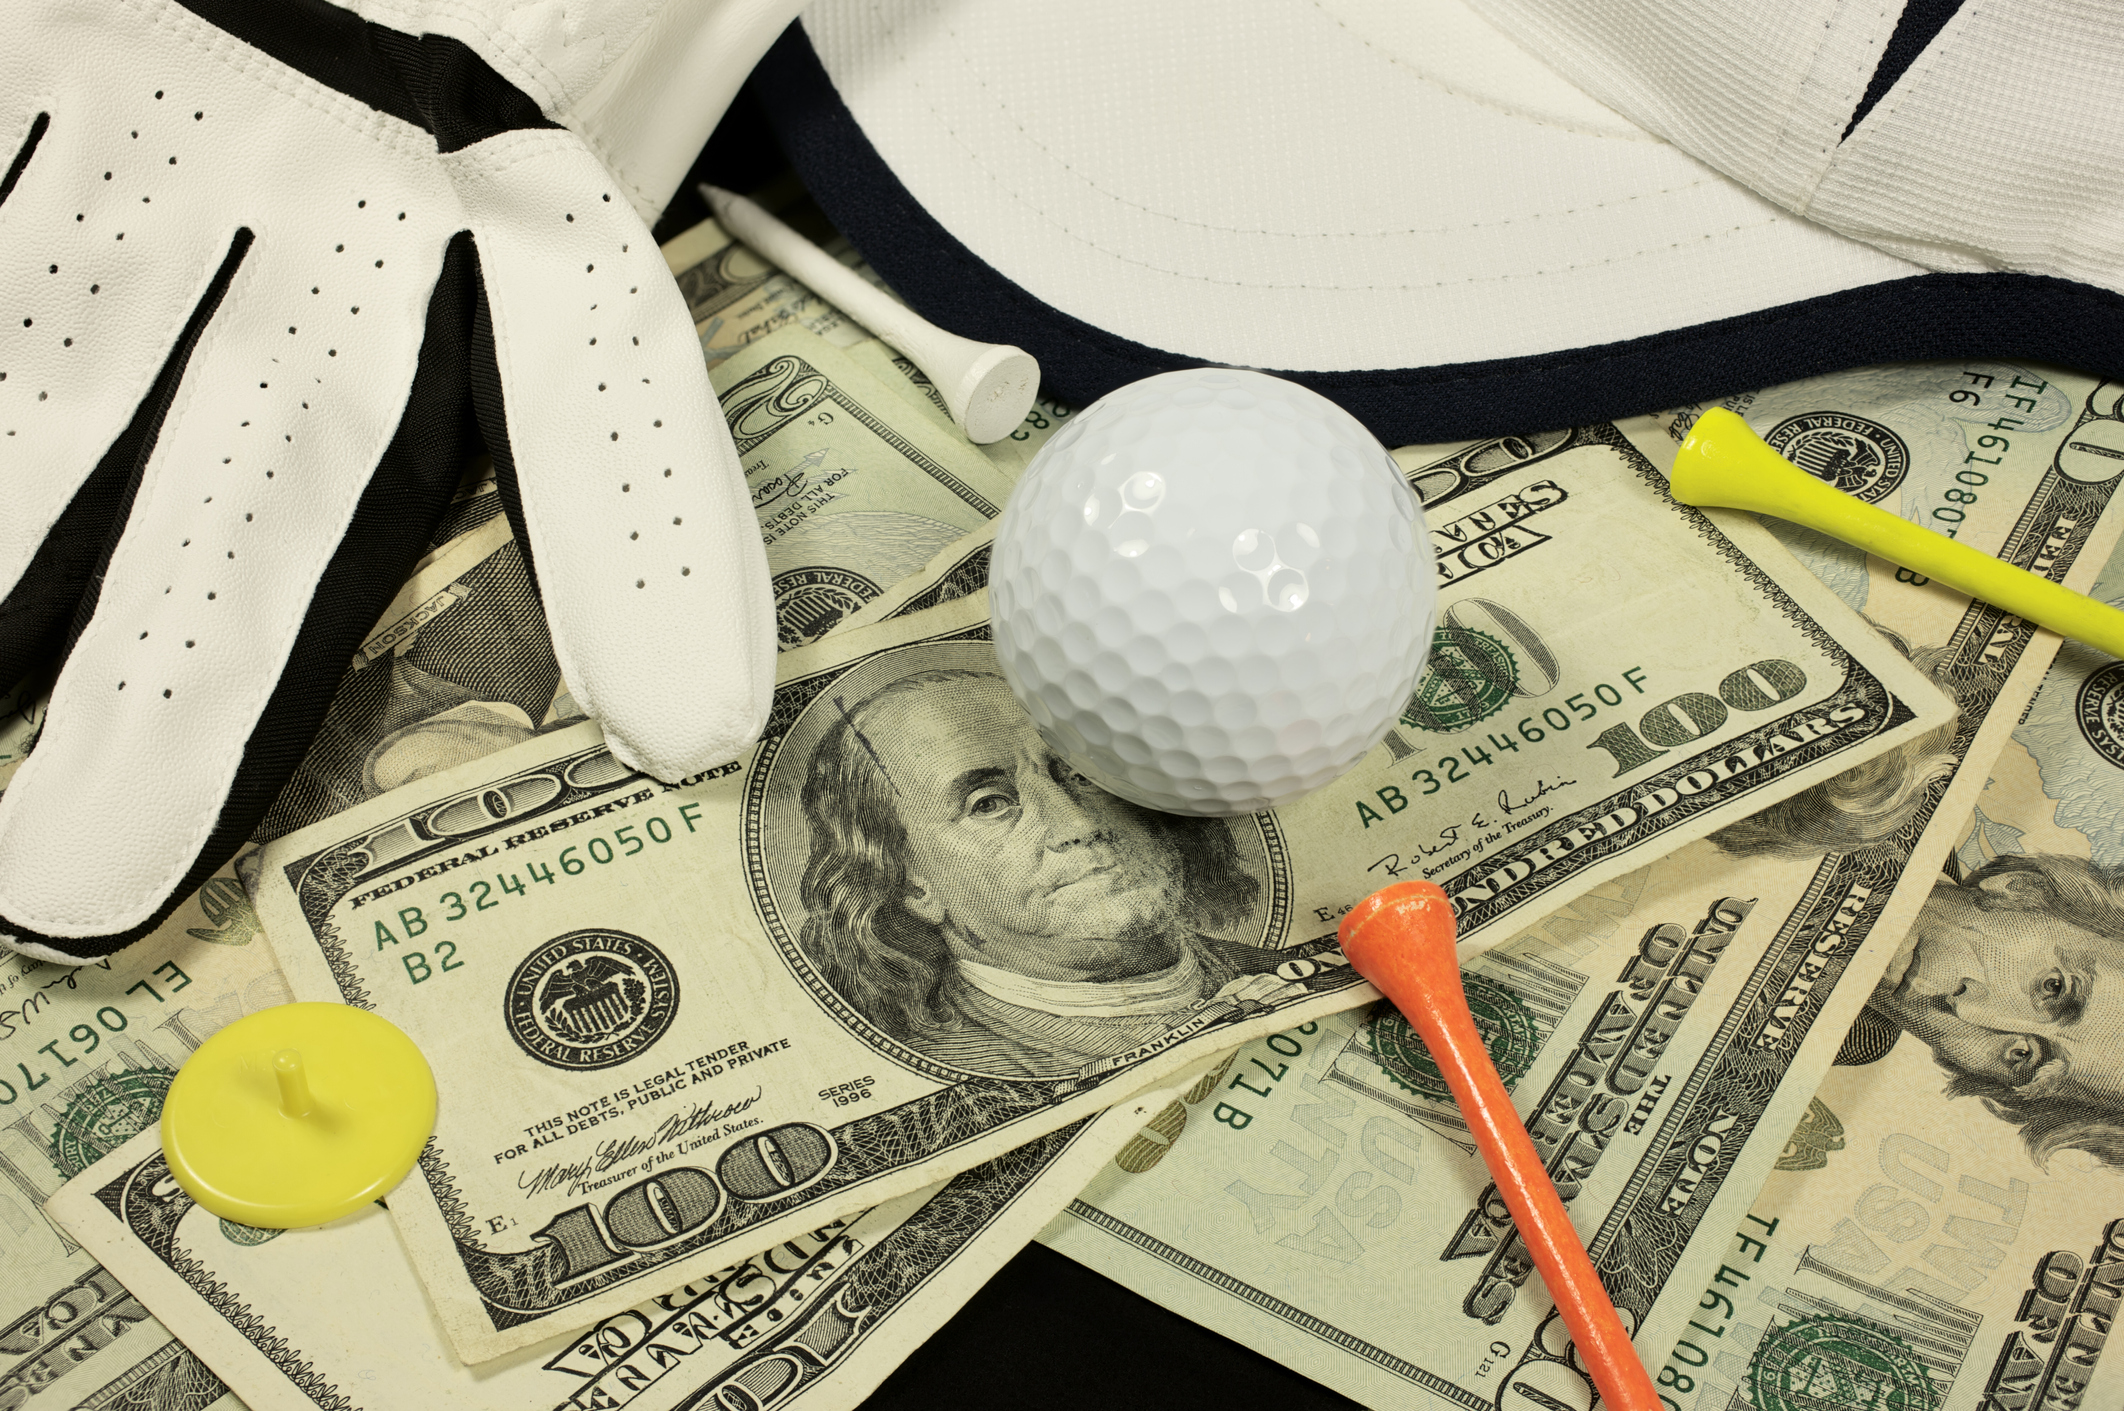 How to bet on pga tour tickets